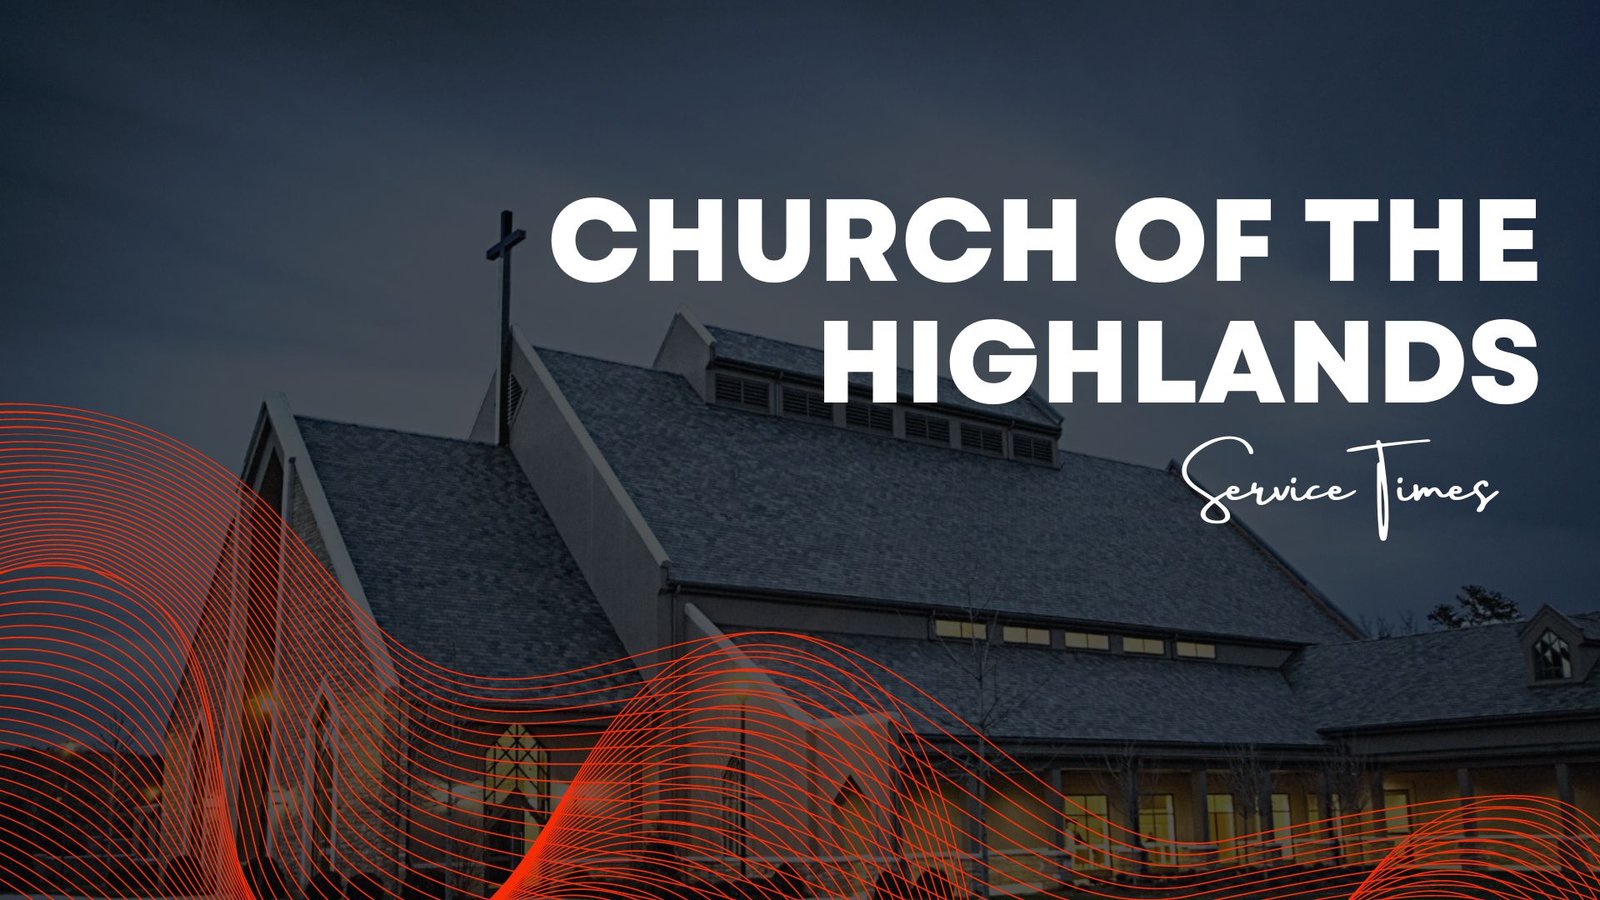 Church of the Highlands Service Times